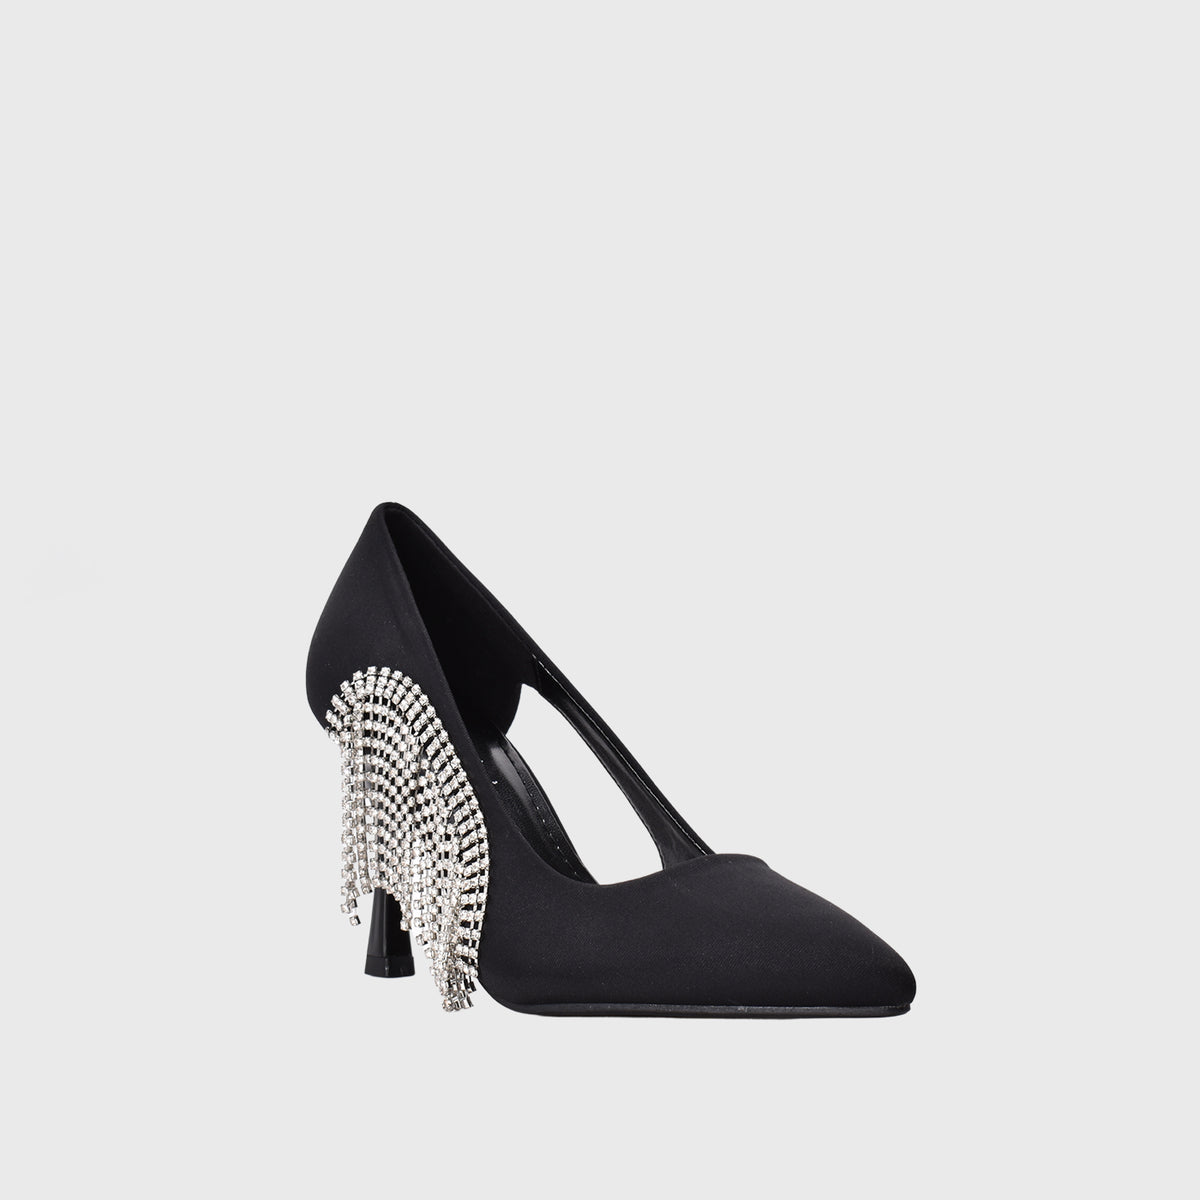 Black High Heel Shoes With a Chain